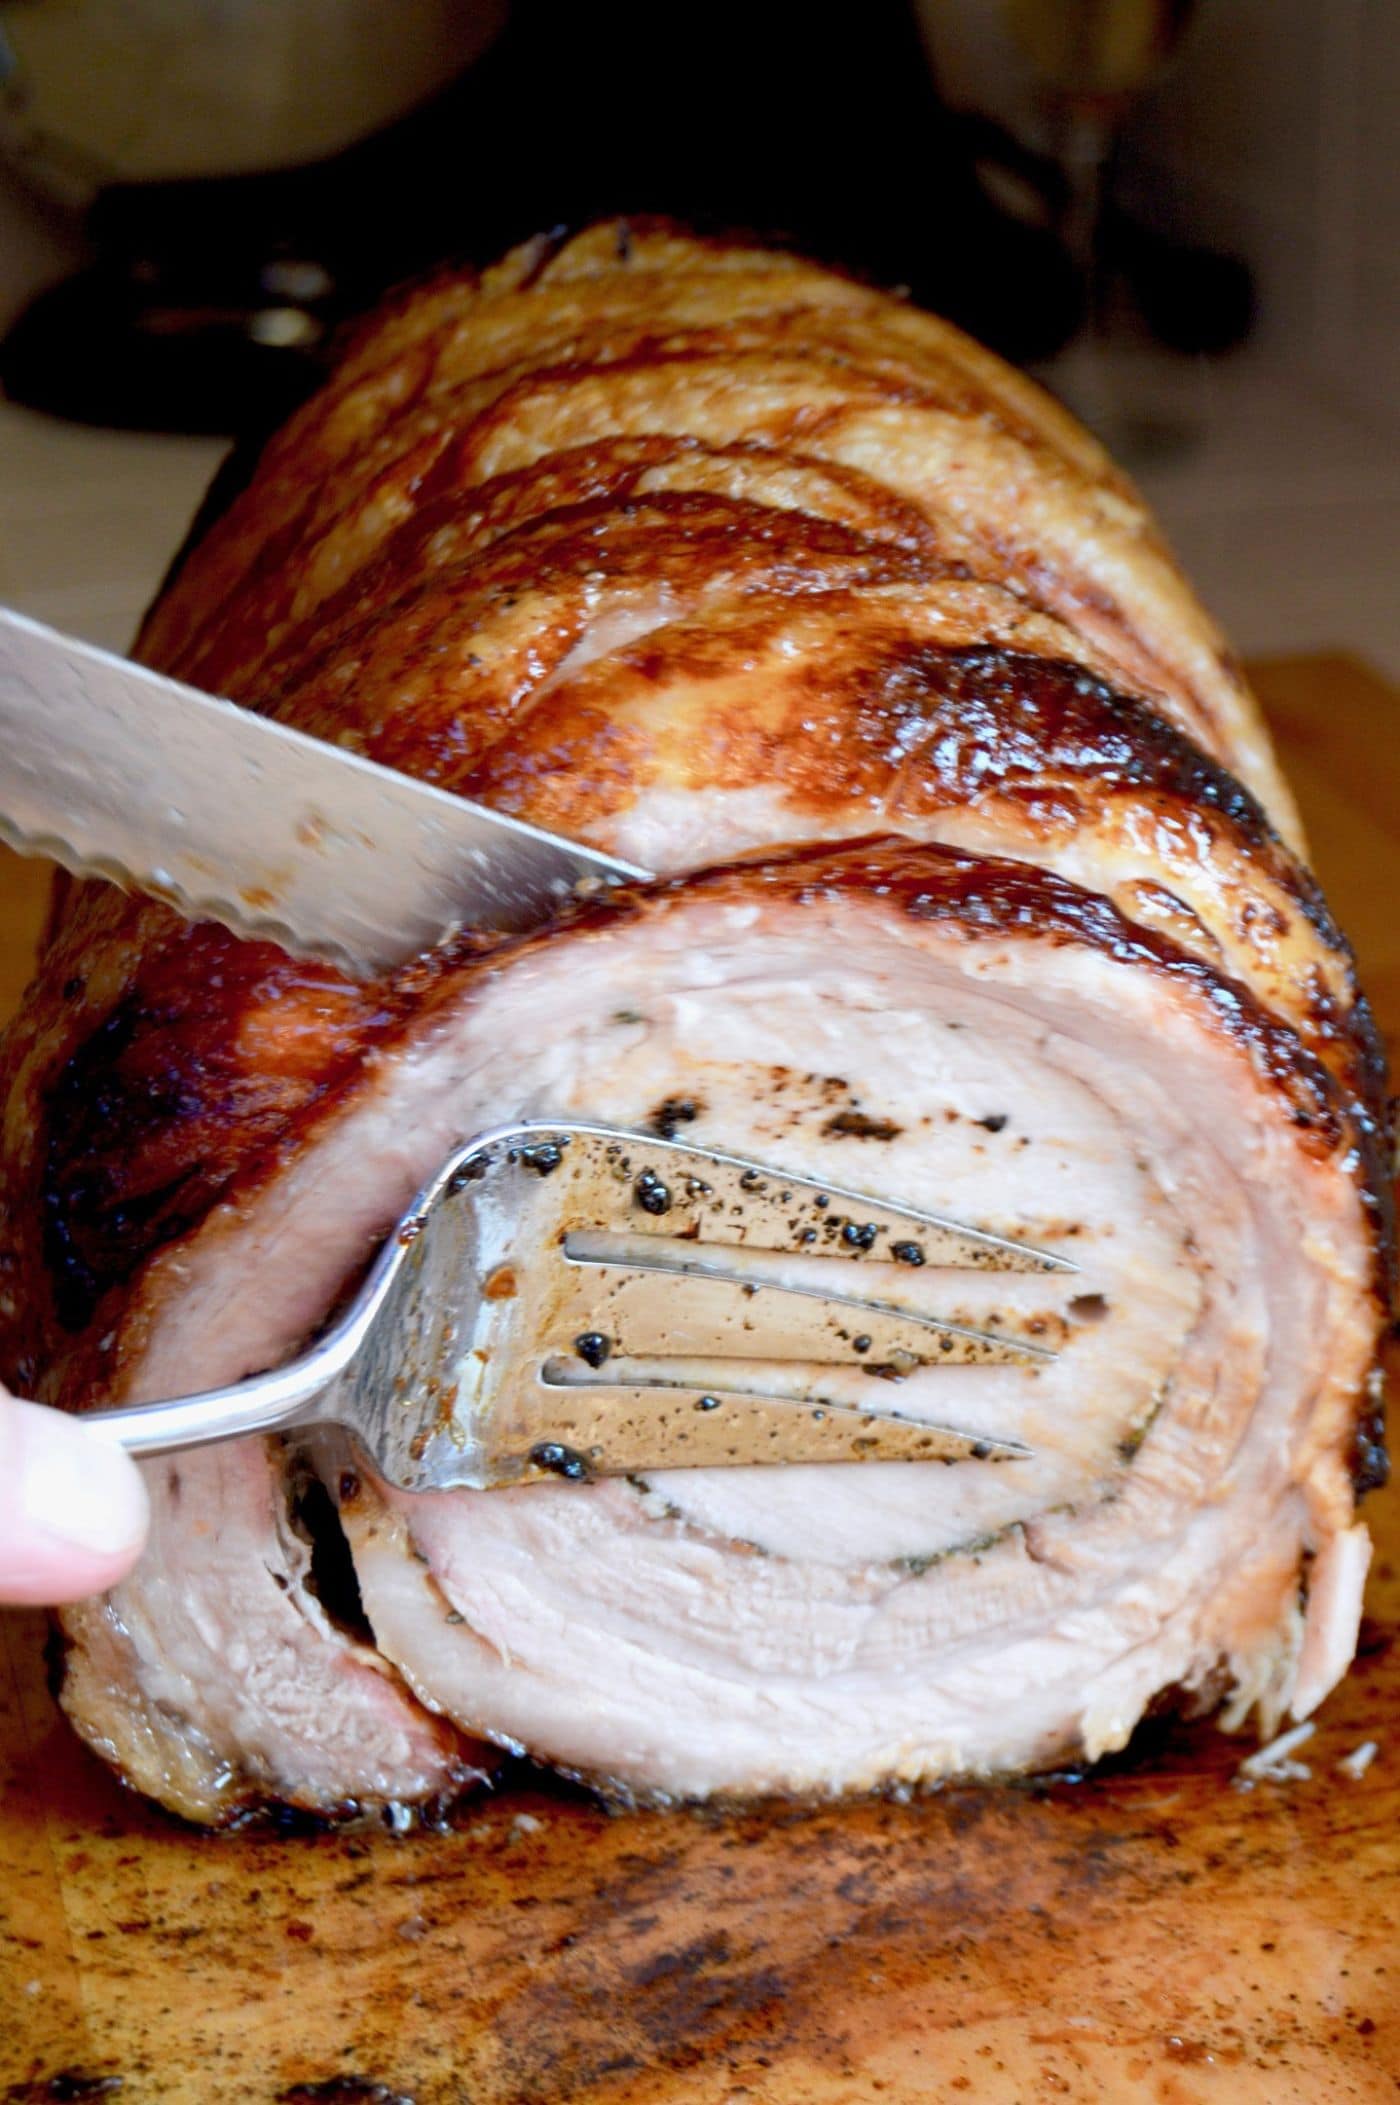 Porchetta, Crispy Pork Belly with herbs wrapped around a pork tenderloin and cooked to juicy, tender perfection.  A crazy impressive meal to your guests, but you'll know how simple it was to make!Porchetta, Crispy Pork Belly with herbs wrapped around a pork tenderloin and cooked to juicy, tender perfection.  A crazy impressive meal to your guests, but you'll know how simple it was to make!